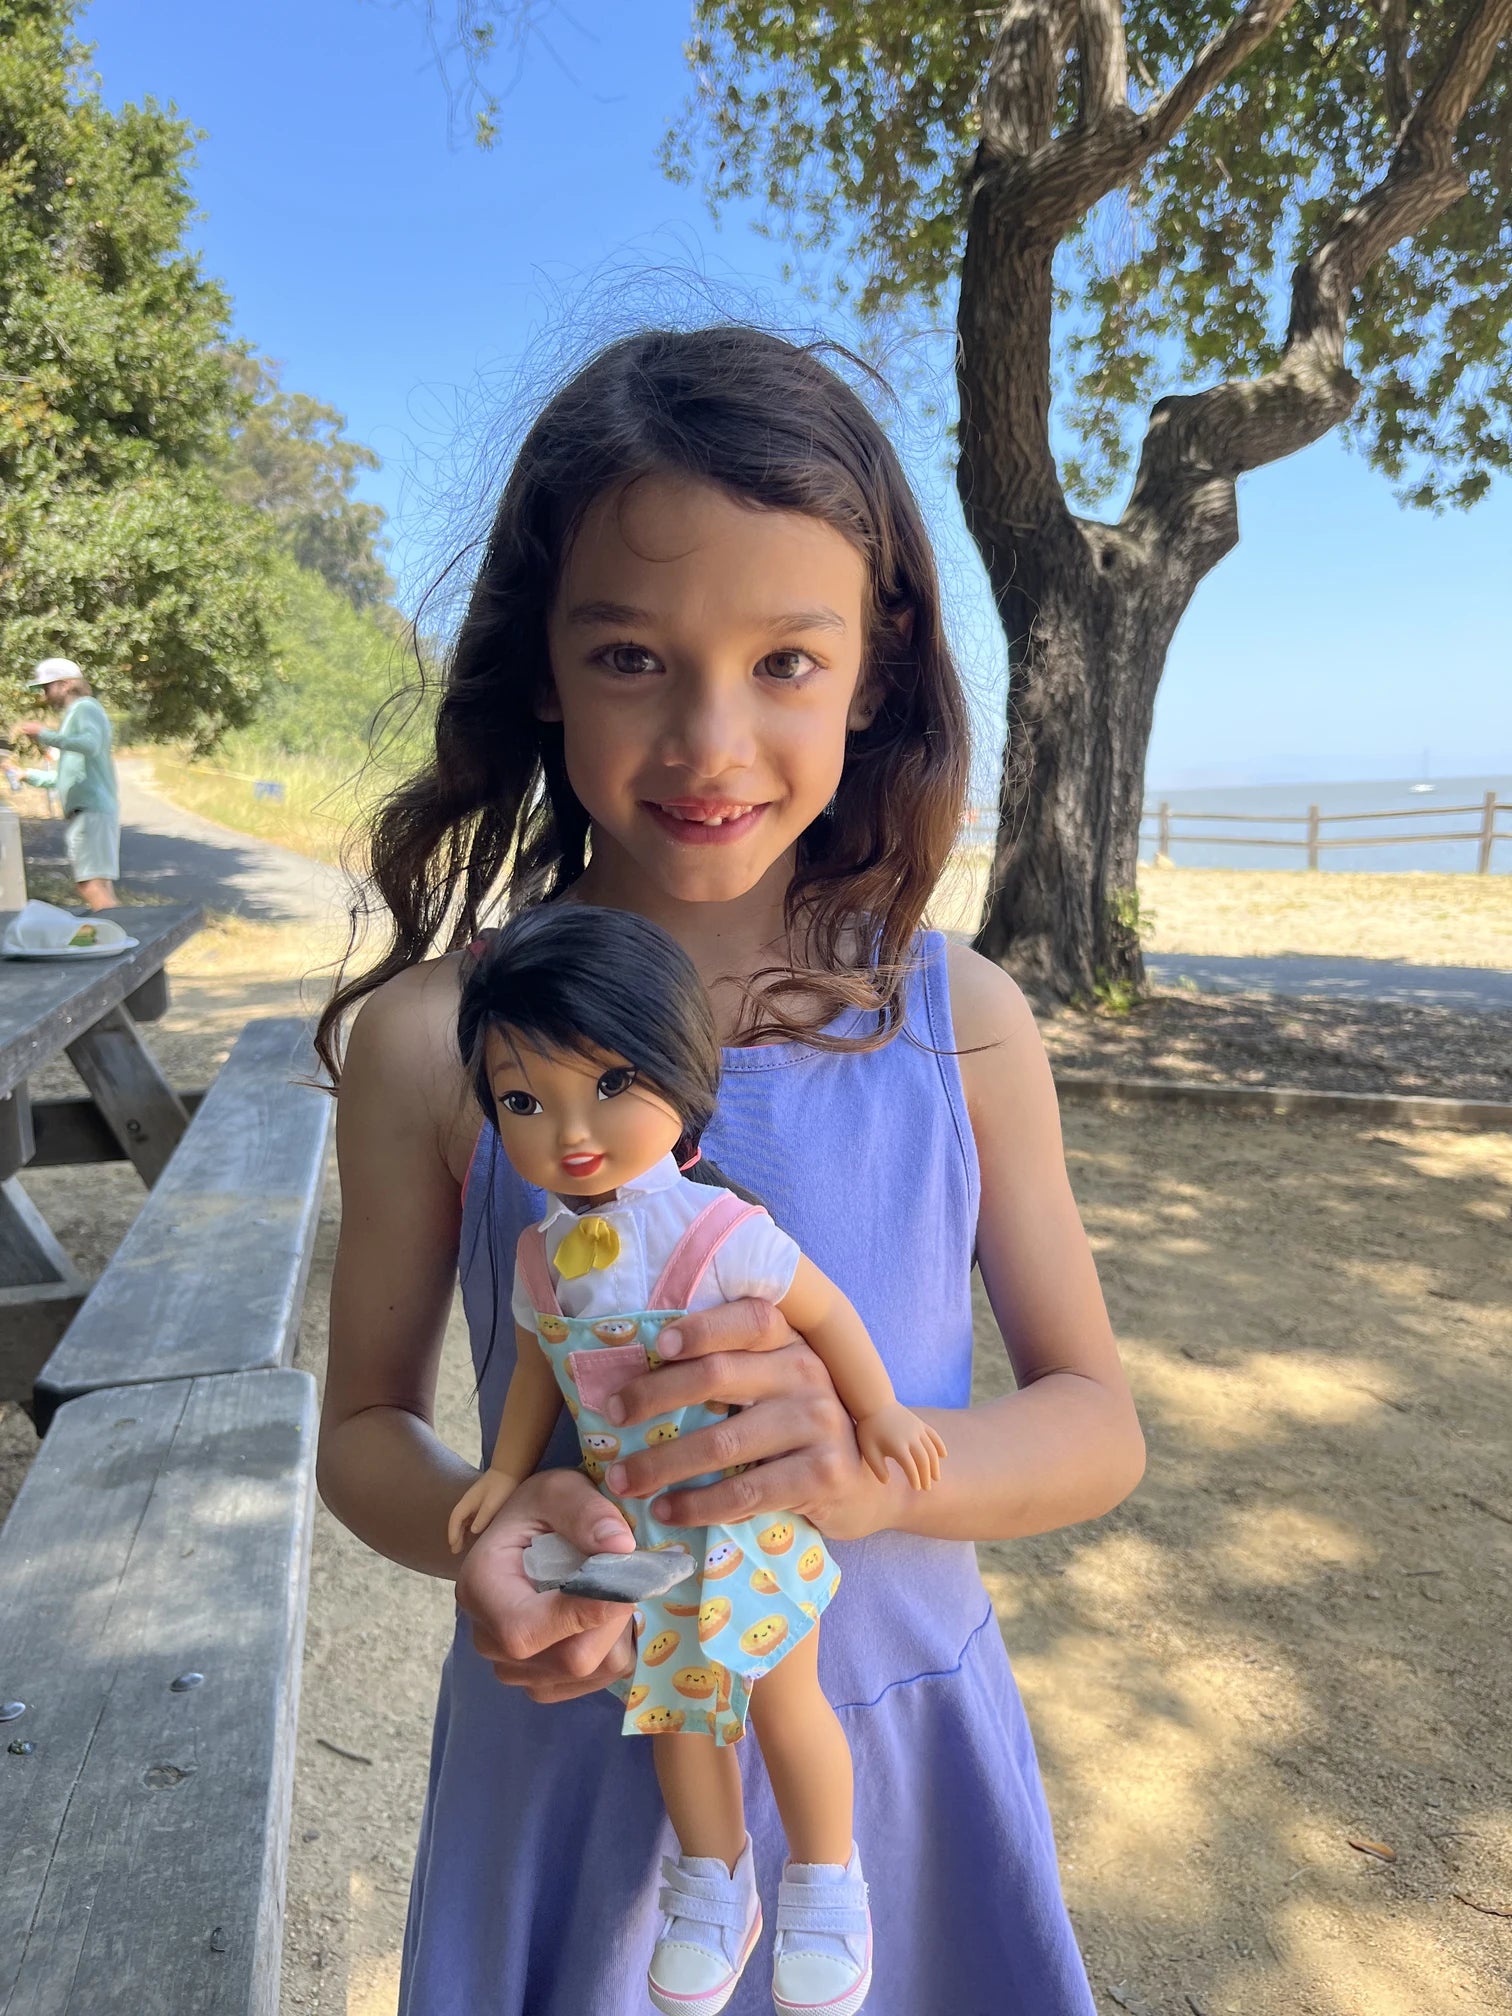 A smiling girl holding a Jilly Bing doll outside